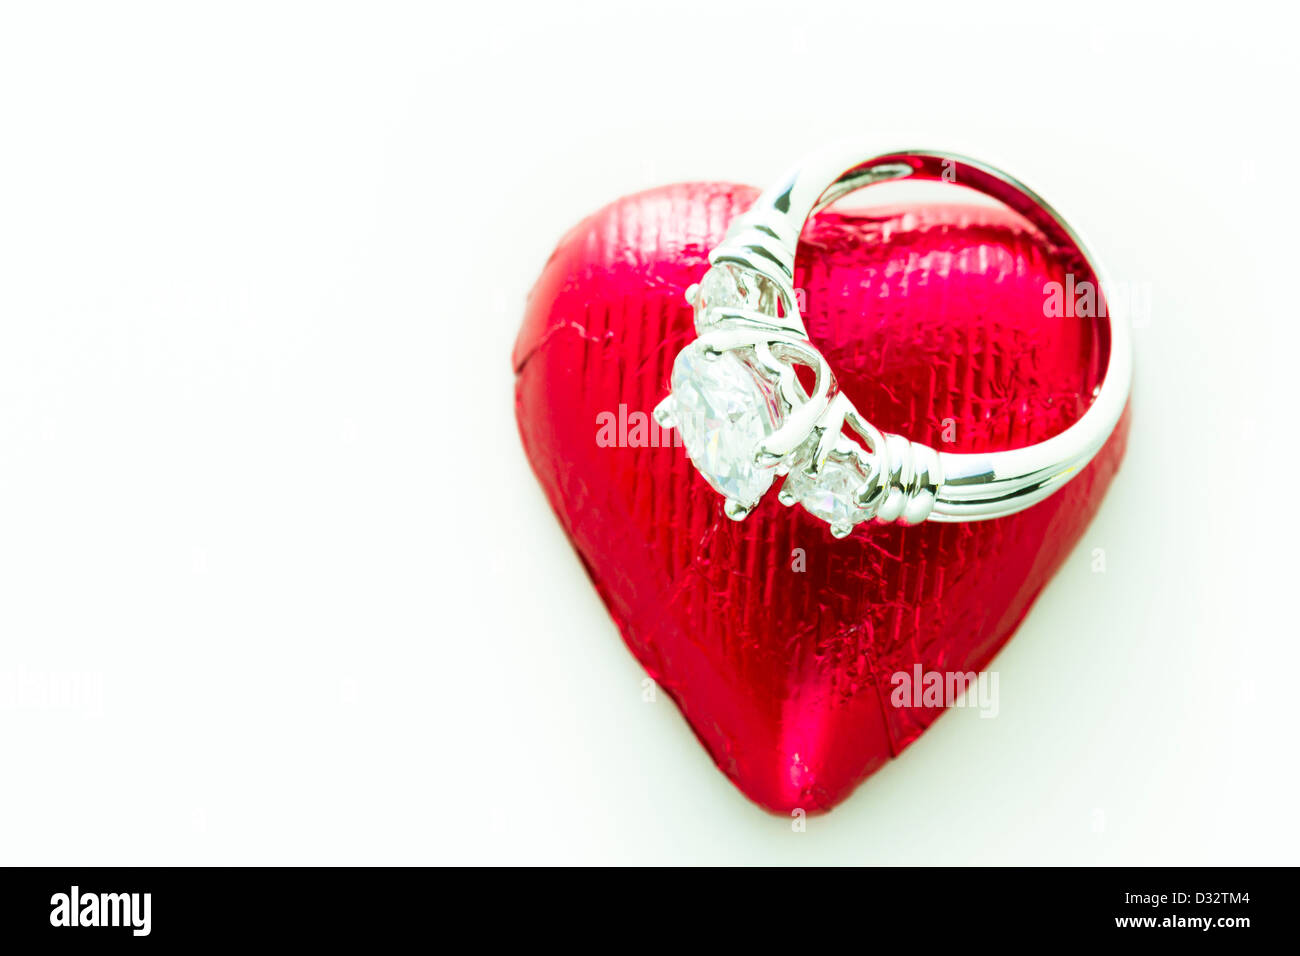 Heart shape chocolate candies wrapped in red foil for Valentine's Day. Stock Photo